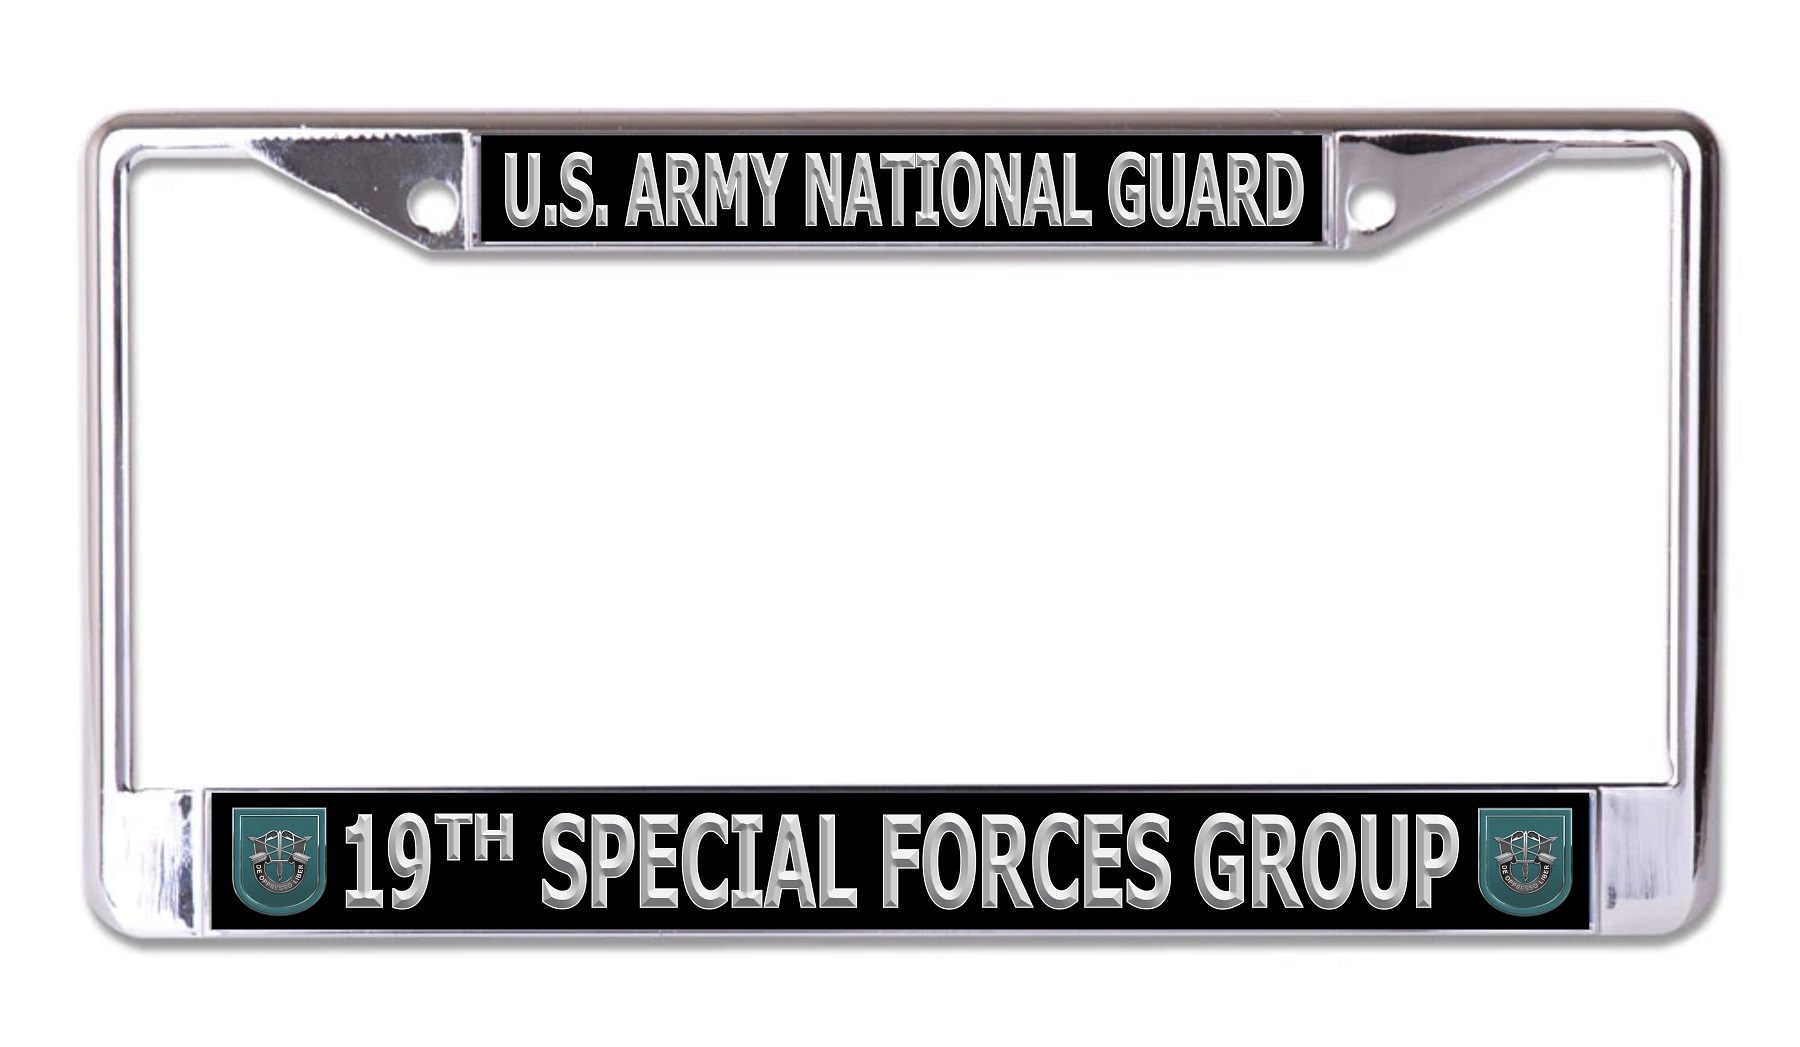 U.S. Army National Guard 19th Special Forces Group Chrome License Plate FRAME